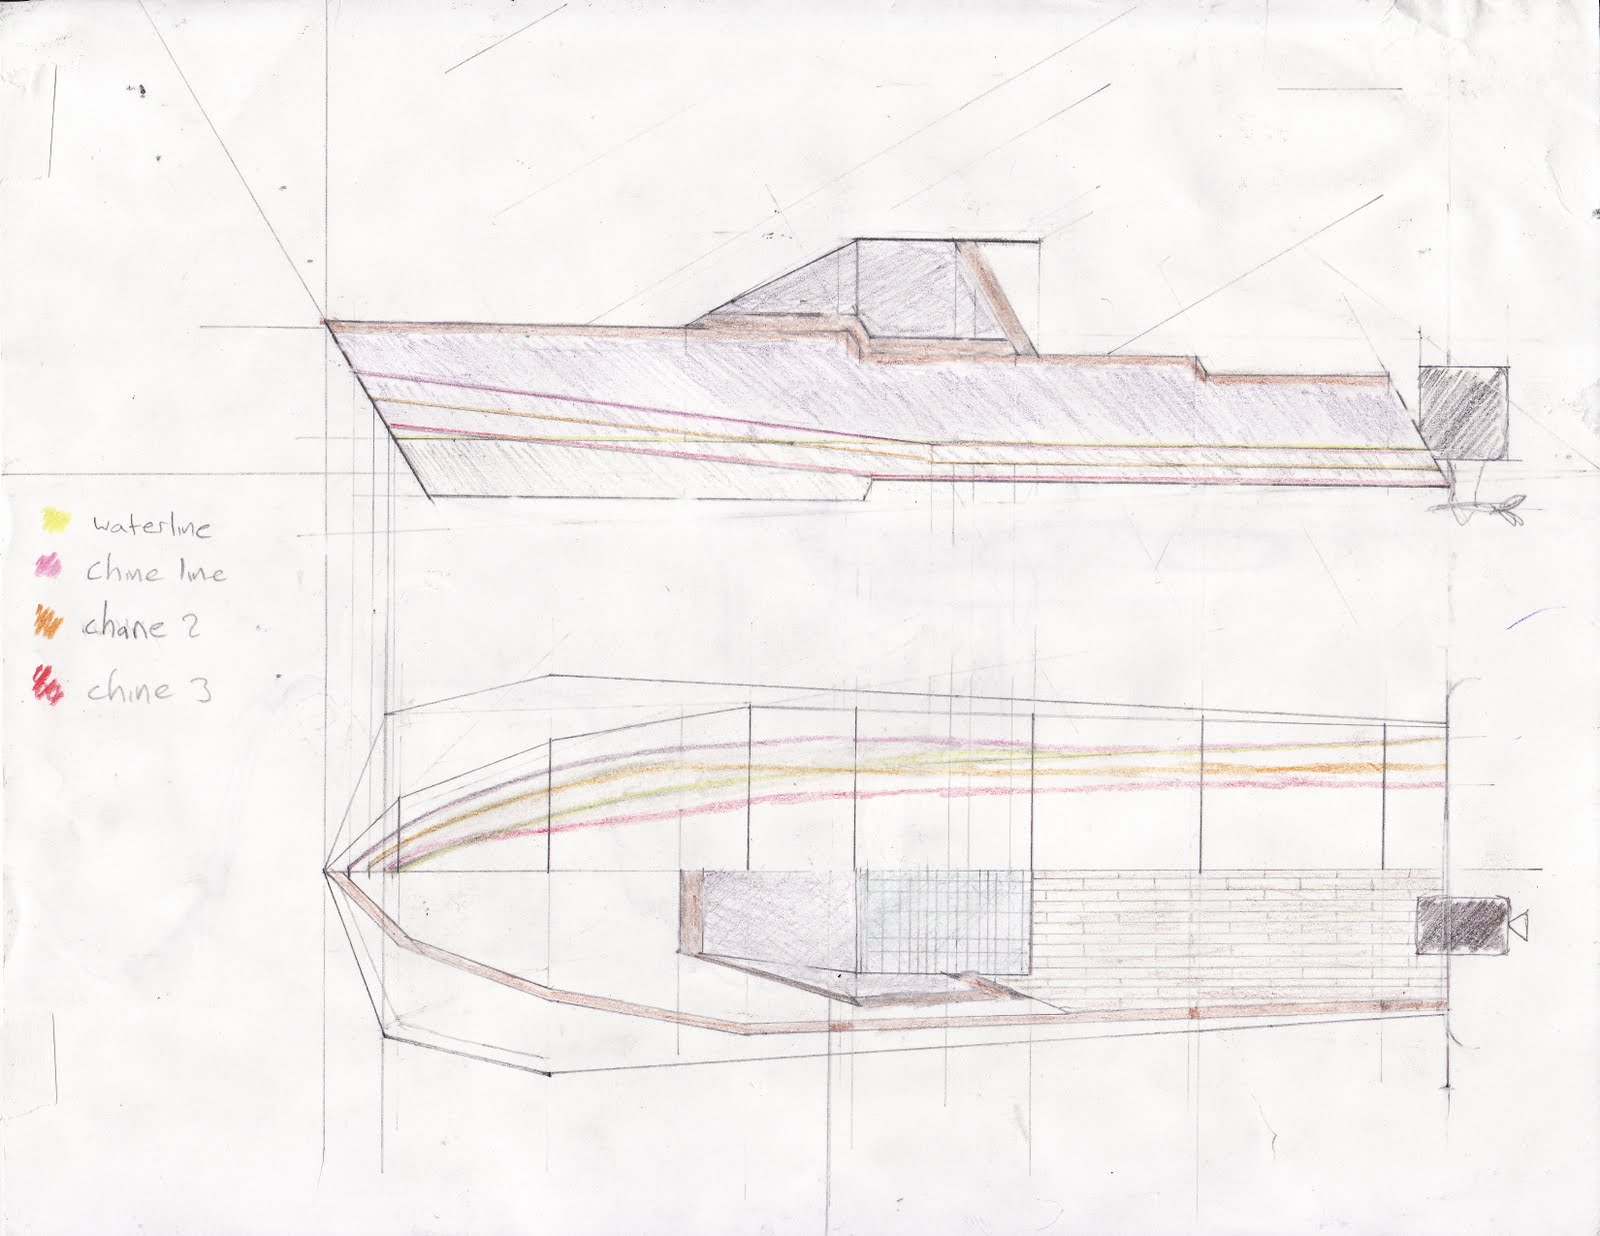 Jay: Mini Speed Boat Plans How to Building Plans